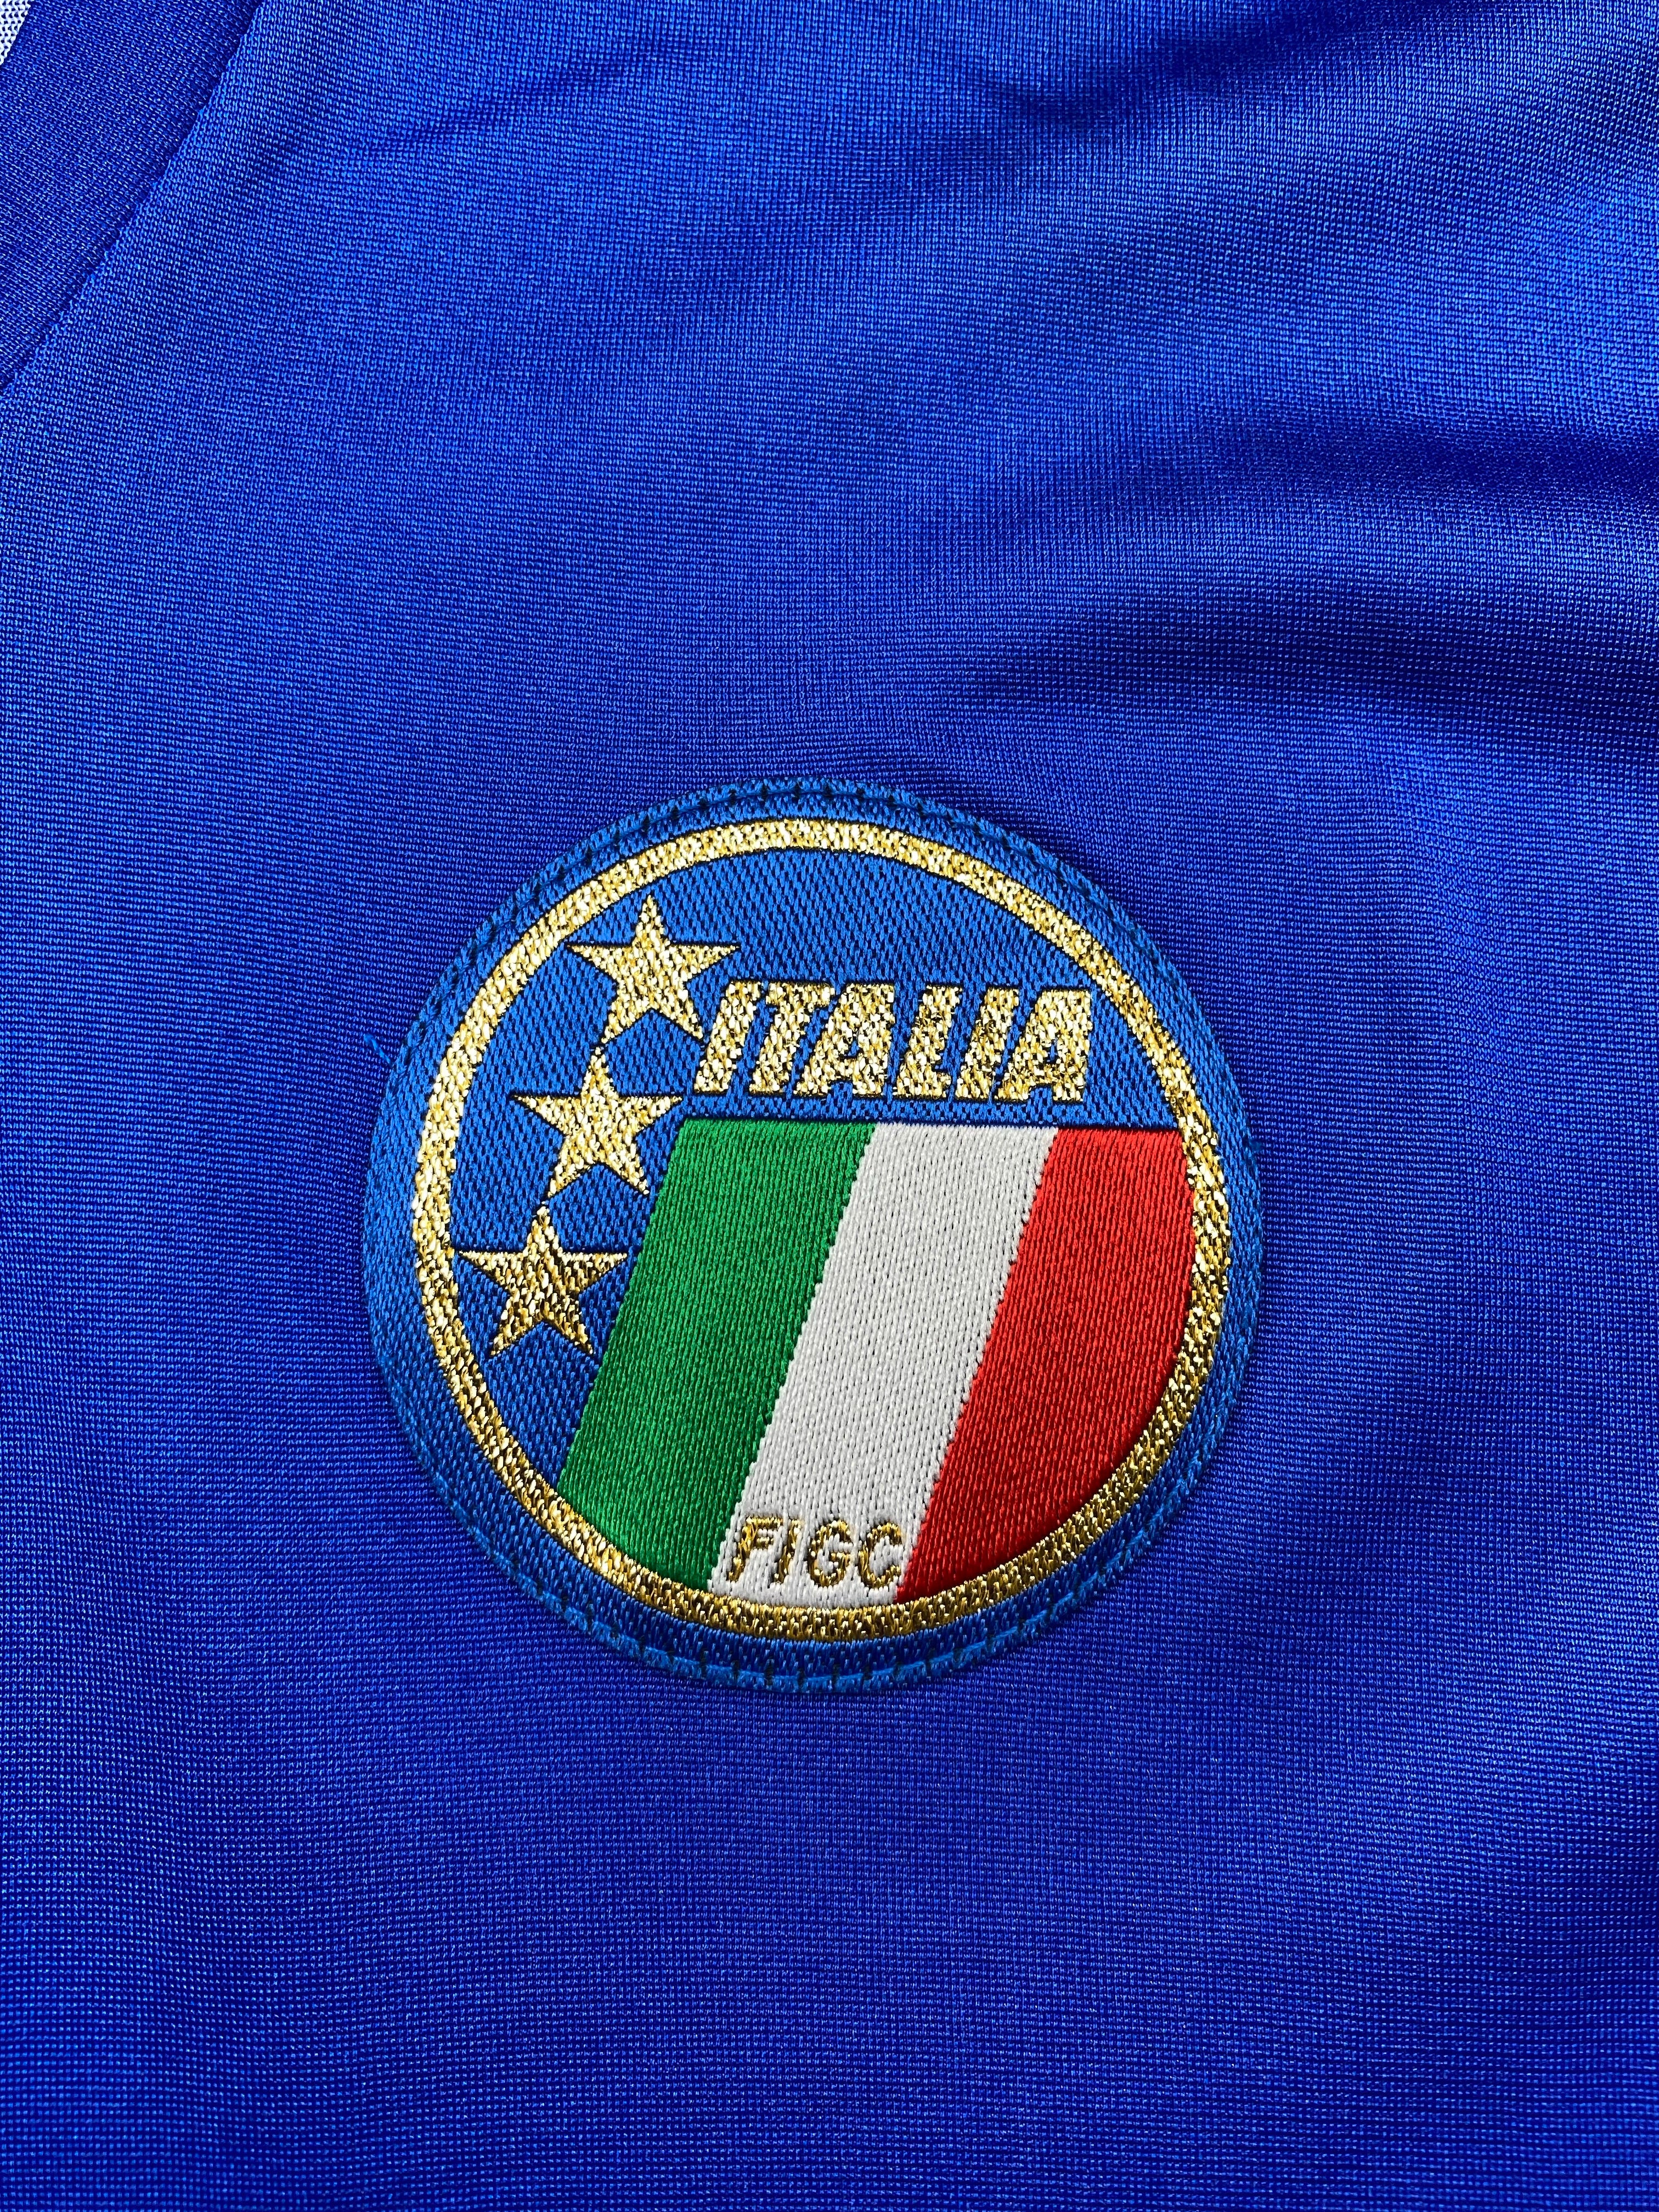 1986/90 Italy Home Shirt (M) 8.5/10